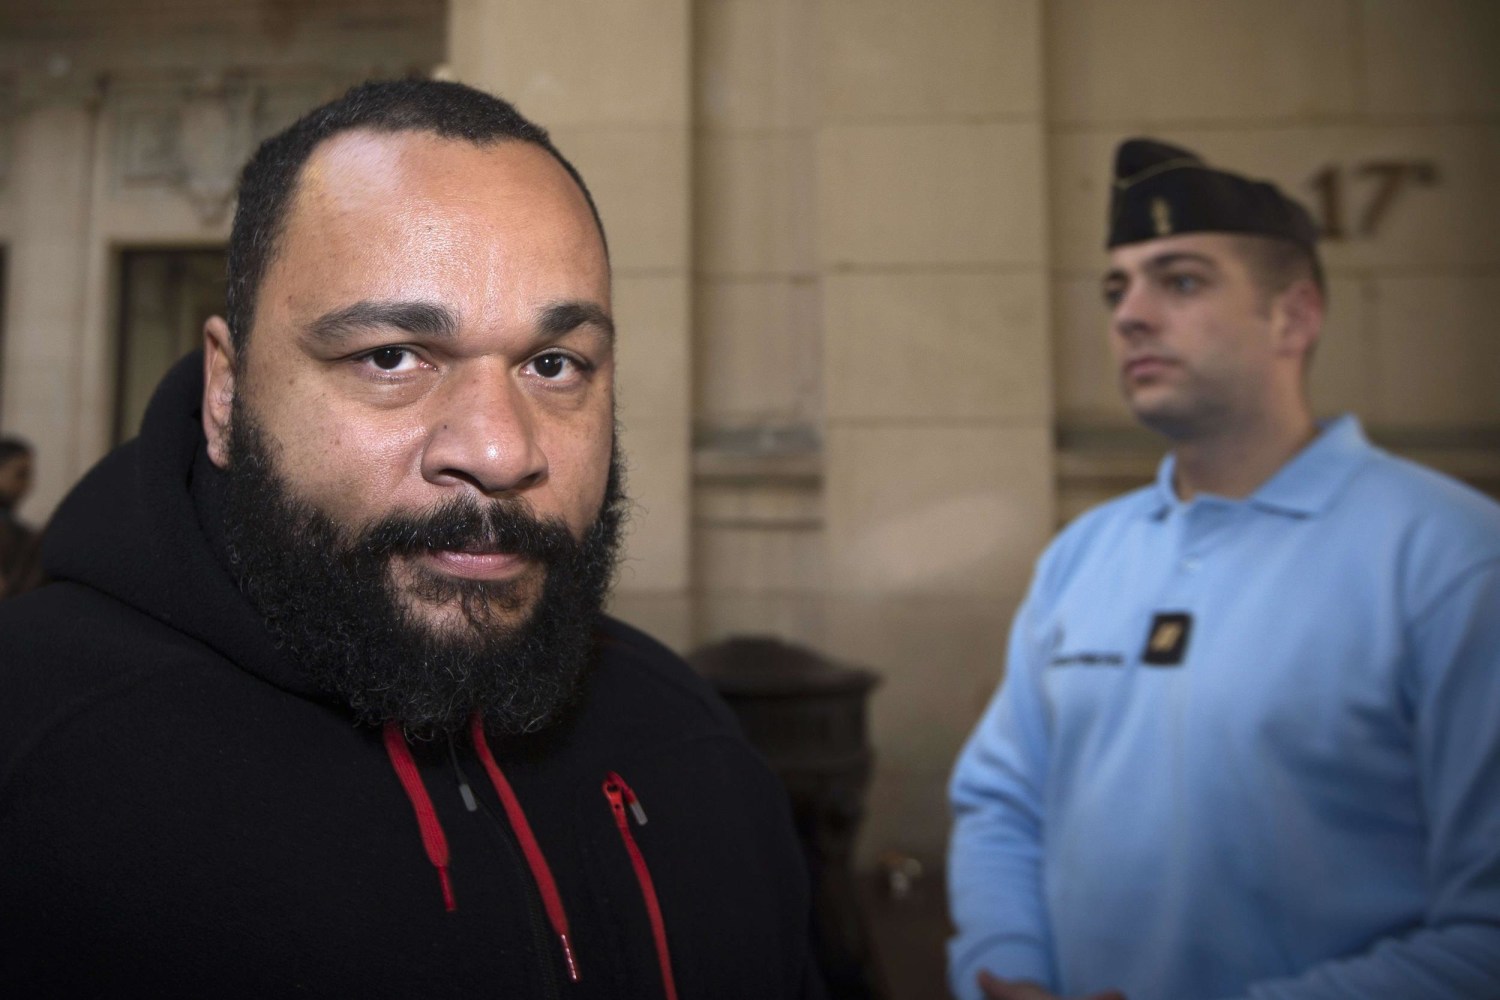 French Comic Dieudonne Detained Over Paris Attack Facebook Post - NBC News